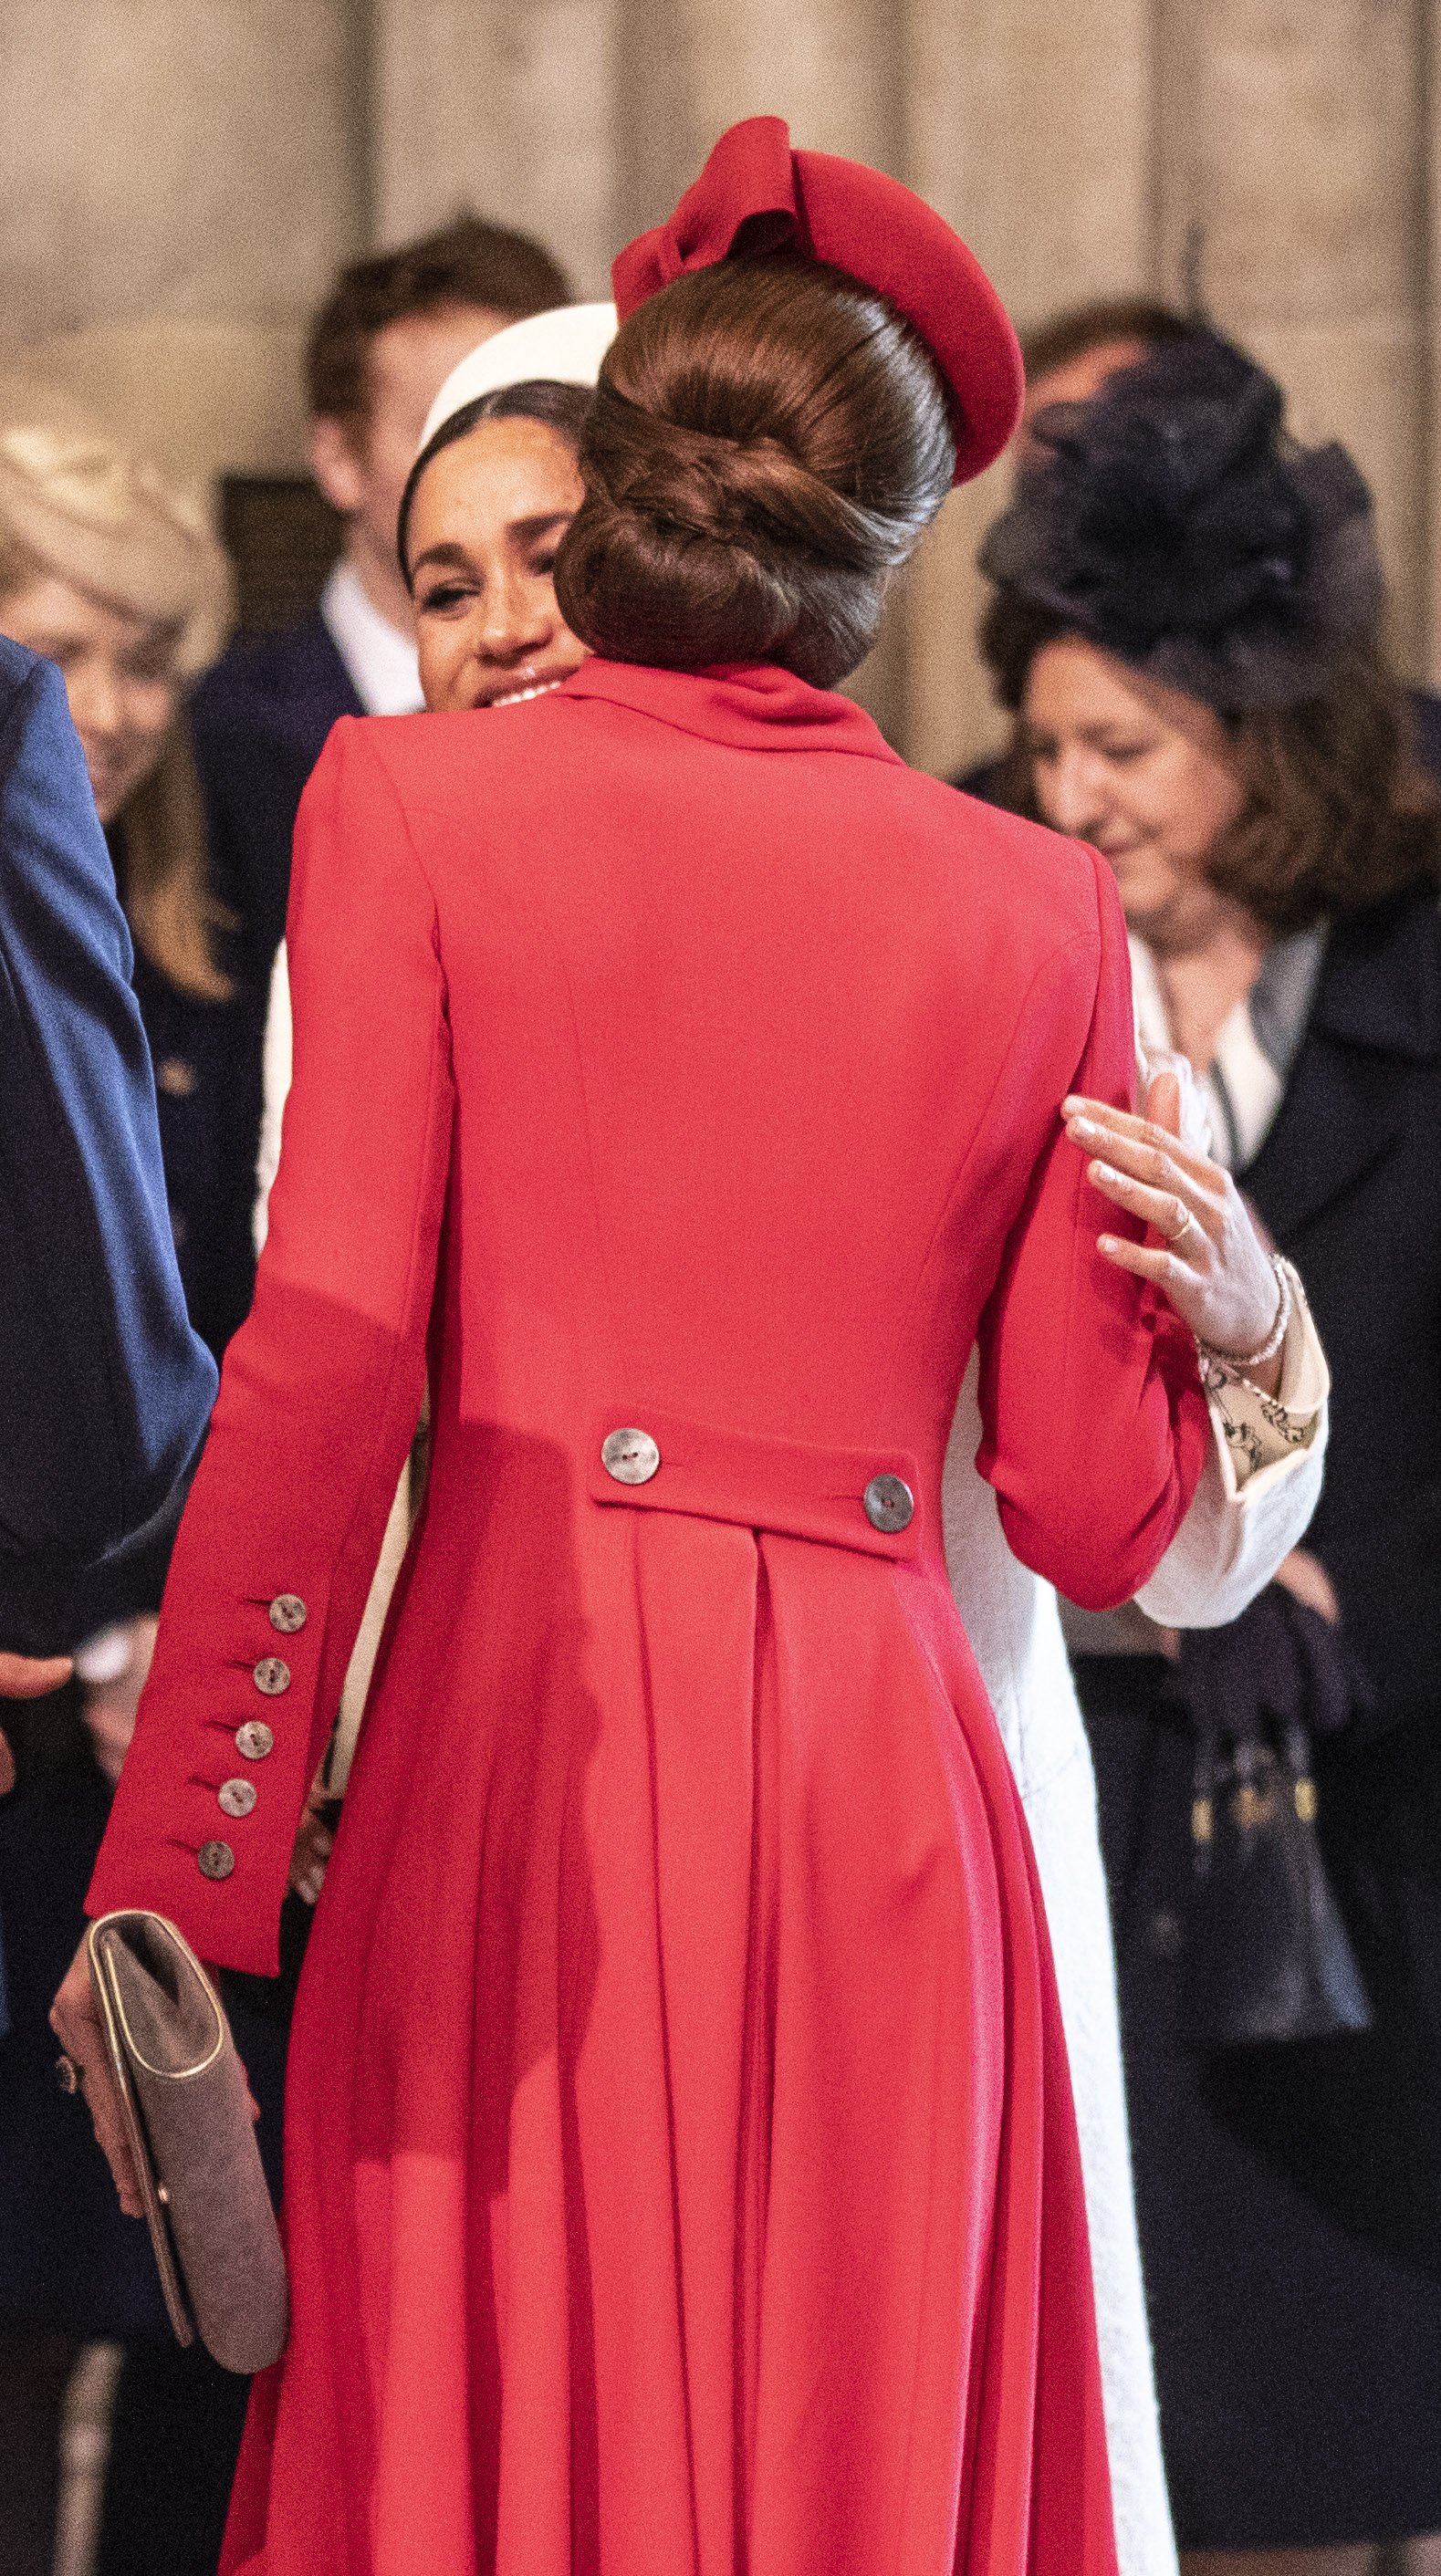 Kate Middleton, Duchess of Cambridge, greets Meghan Markle, Duchess of Sussex at Westminster Abbey for a Commonwealth day service on March 11, 2019 in London, England | Photo: Getty Images